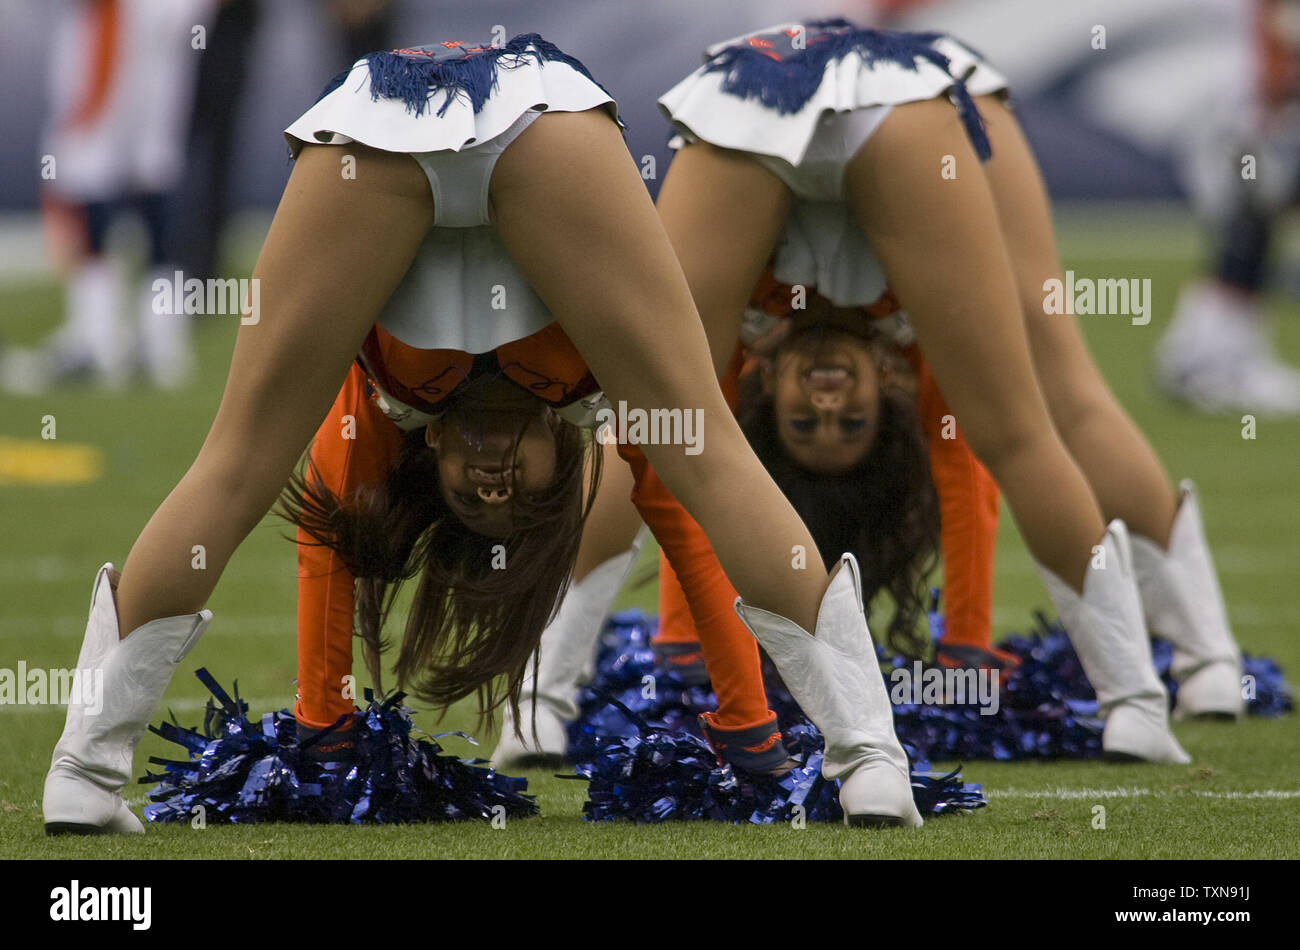 Denver Broncos cheerleaders perform during a timeout at Invesco Field at Mile High in Denver on September 20, 2009.  Denver defeats Cleveland 27-6 in their NFL home opener.   UPI/Gary C. Caskey... Stock Photo